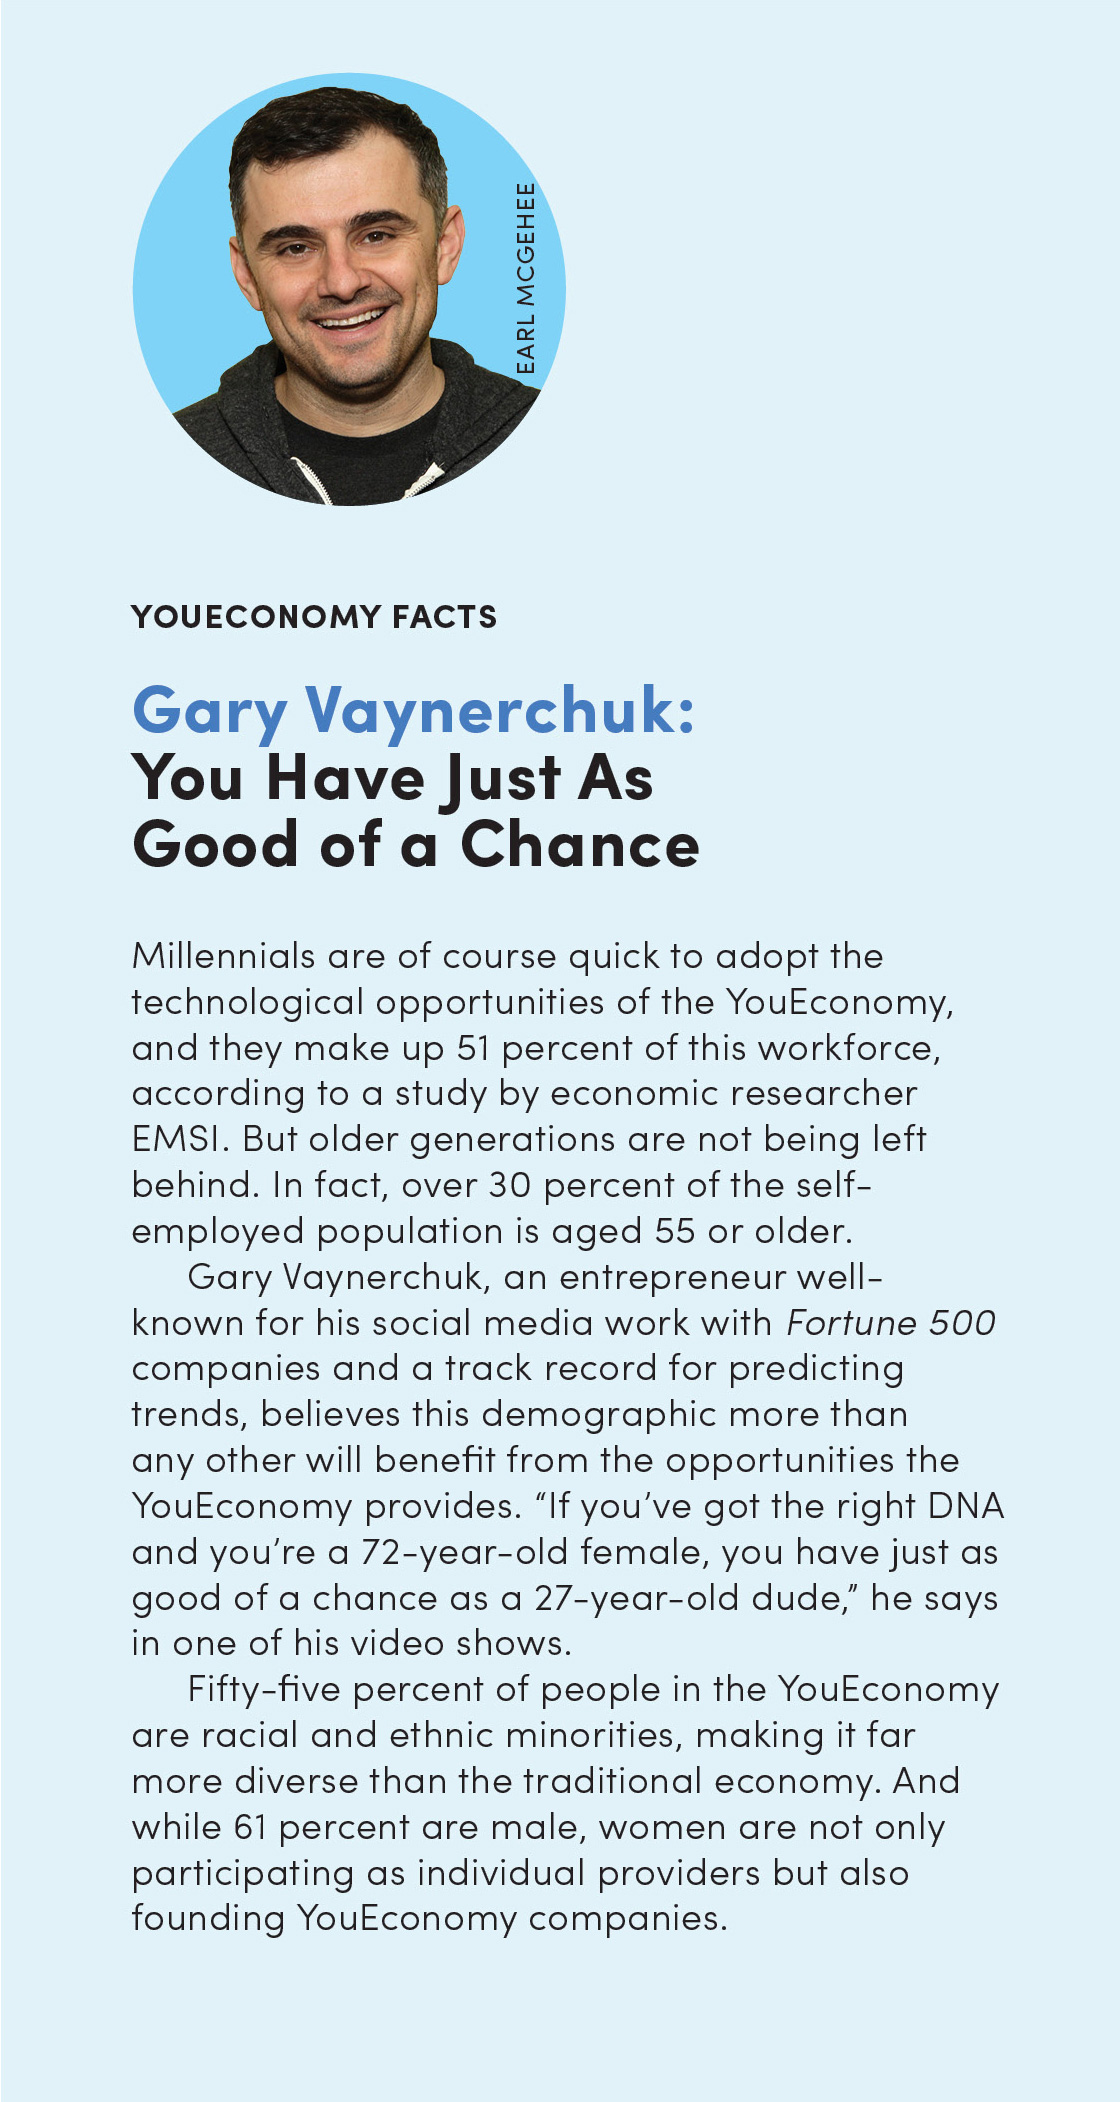 Introducing the YouEconomy